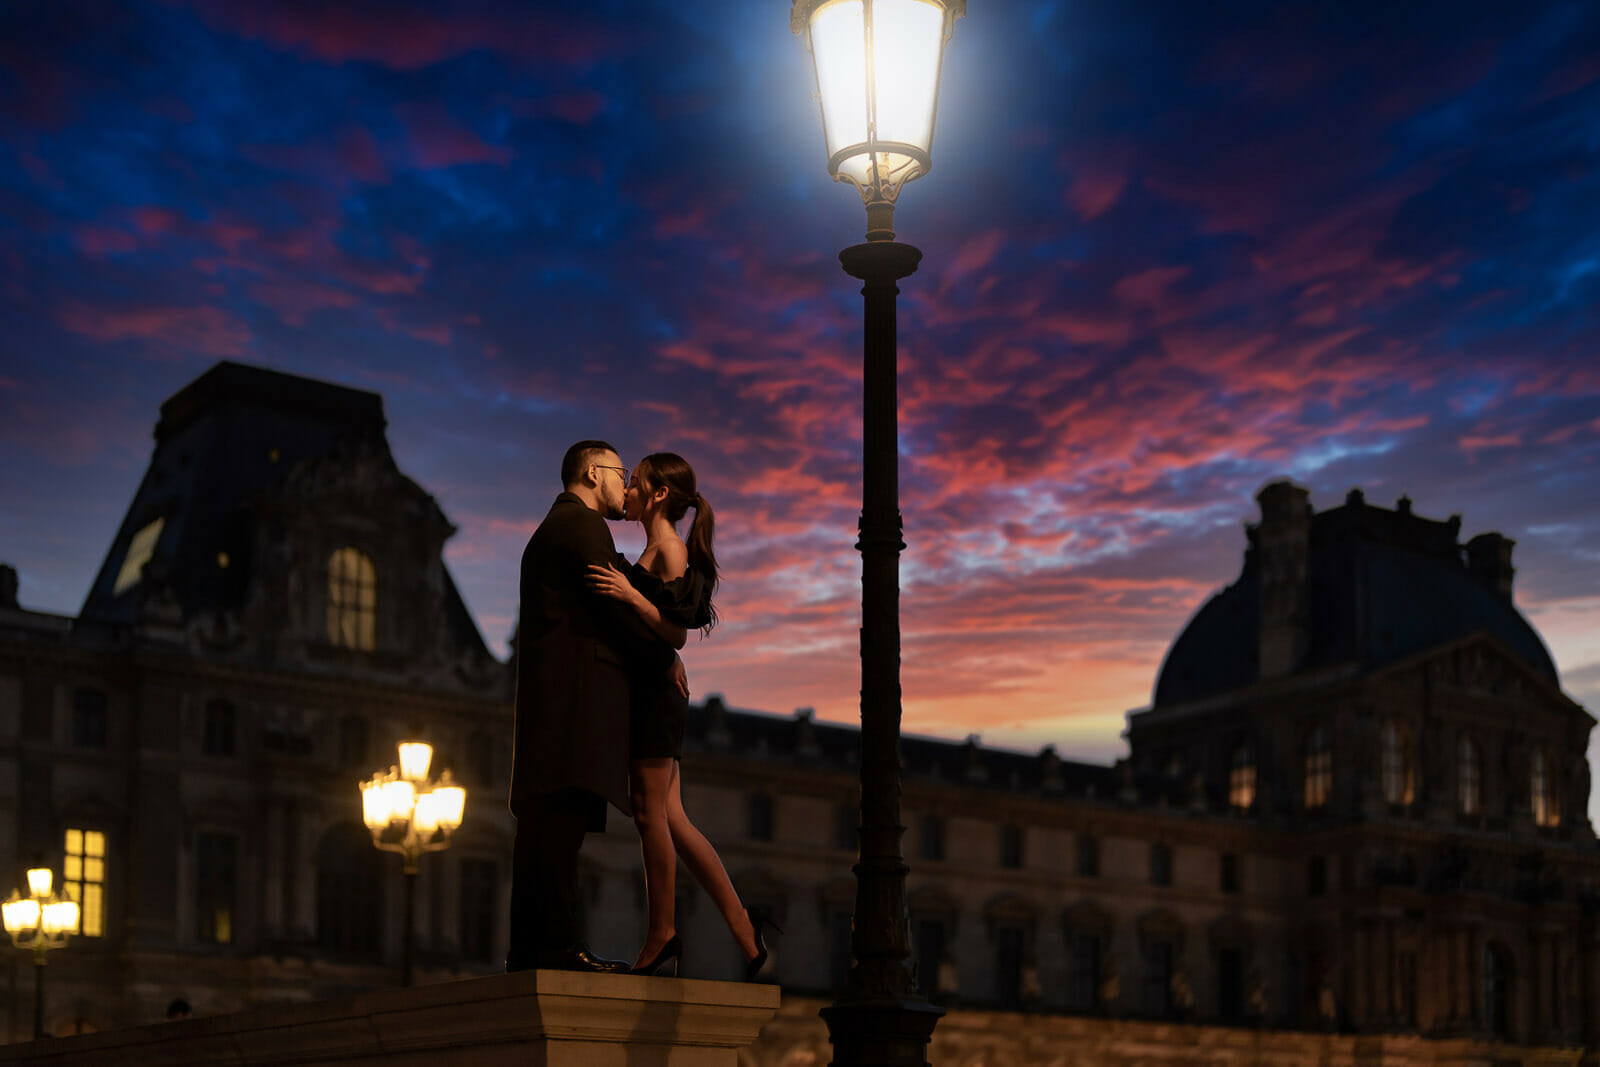 Romantic Eiffel Tower Marriage Proposal with couple photoshoot a